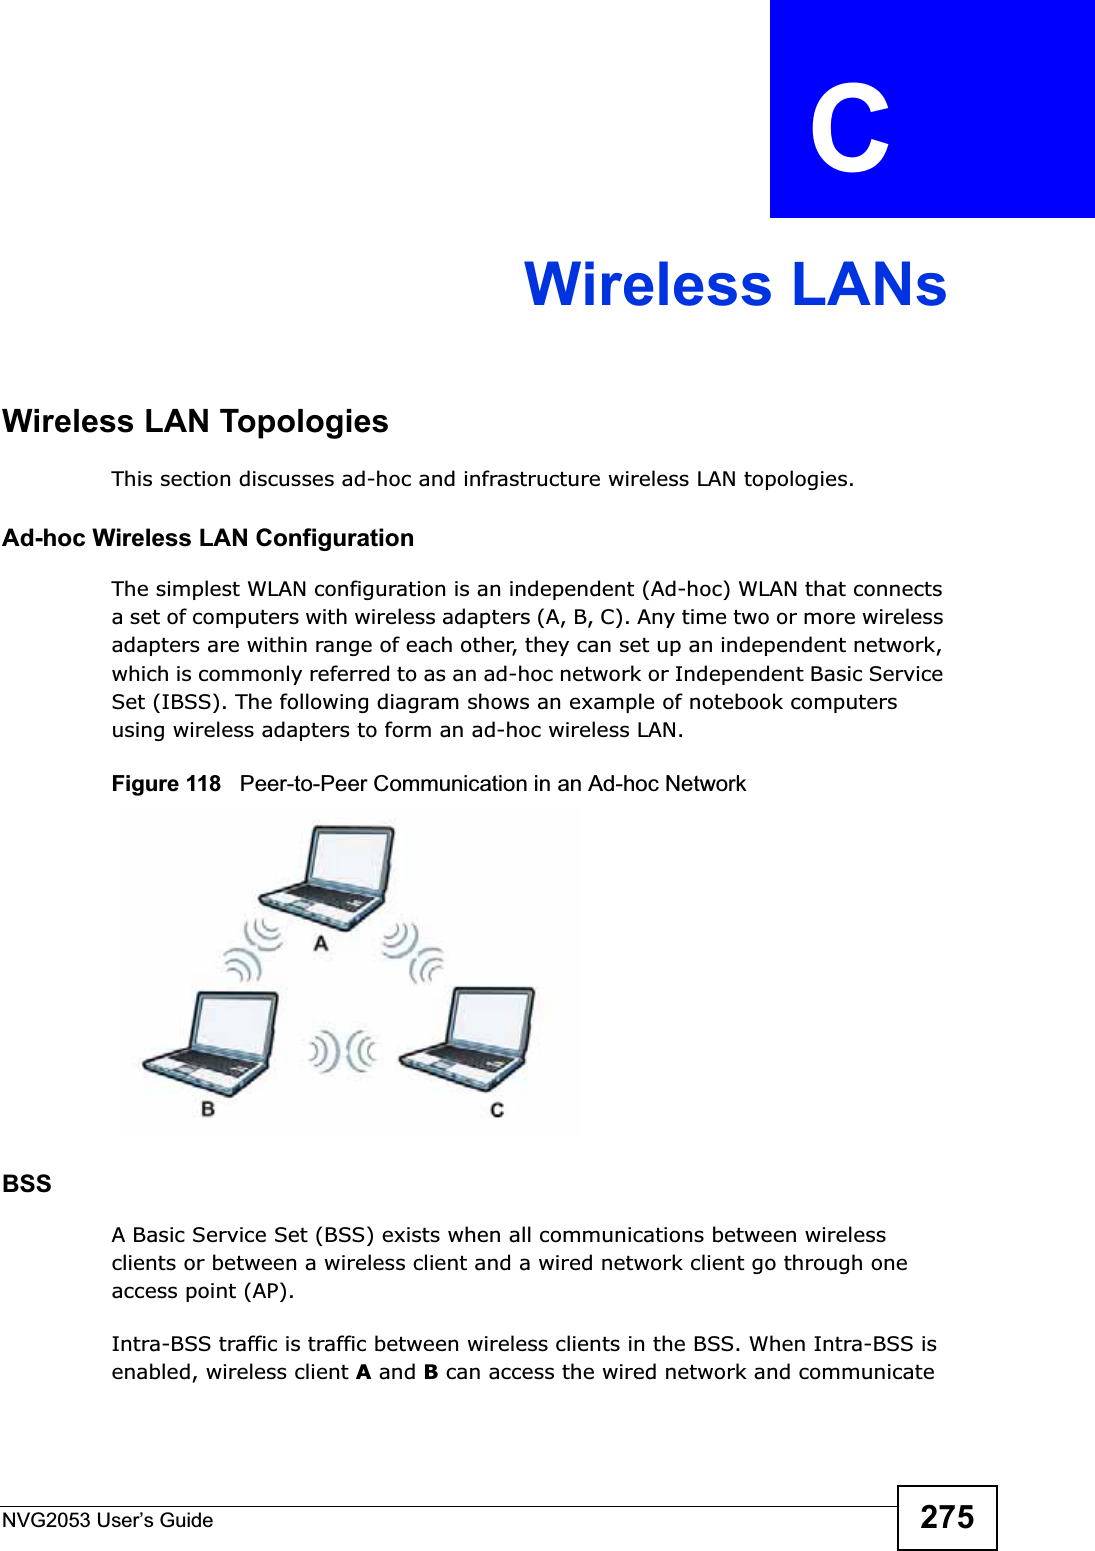 NVG2053 User’s Guide 275APPENDIX  C Wireless LANsWireless LAN TopologiesThis section discusses ad-hoc and infrastructure wireless LAN topologies.Ad-hoc Wireless LAN ConfigurationThe simplest WLAN configuration is an independent (Ad-hoc) WLAN that connects a set of computers with wireless adapters (A, B, C). Any time two or more wireless adapters are within range of each other, they can set up an independent network, which is commonly referred to as an ad-hoc network or Independent Basic Service Set (IBSS). The following diagram shows an example of notebook computers using wireless adapters to form an ad-hoc wireless LAN. Figure 118   Peer-to-Peer Communication in an Ad-hoc NetworkBSSA Basic Service Set (BSS) exists when all communications between wireless clients or between a wireless client and a wired network client go through one access point (AP). Intra-BSS traffic is traffic between wireless clients in the BSS. When Intra-BSS is enabled, wireless client A and B can access the wired network and communicate 